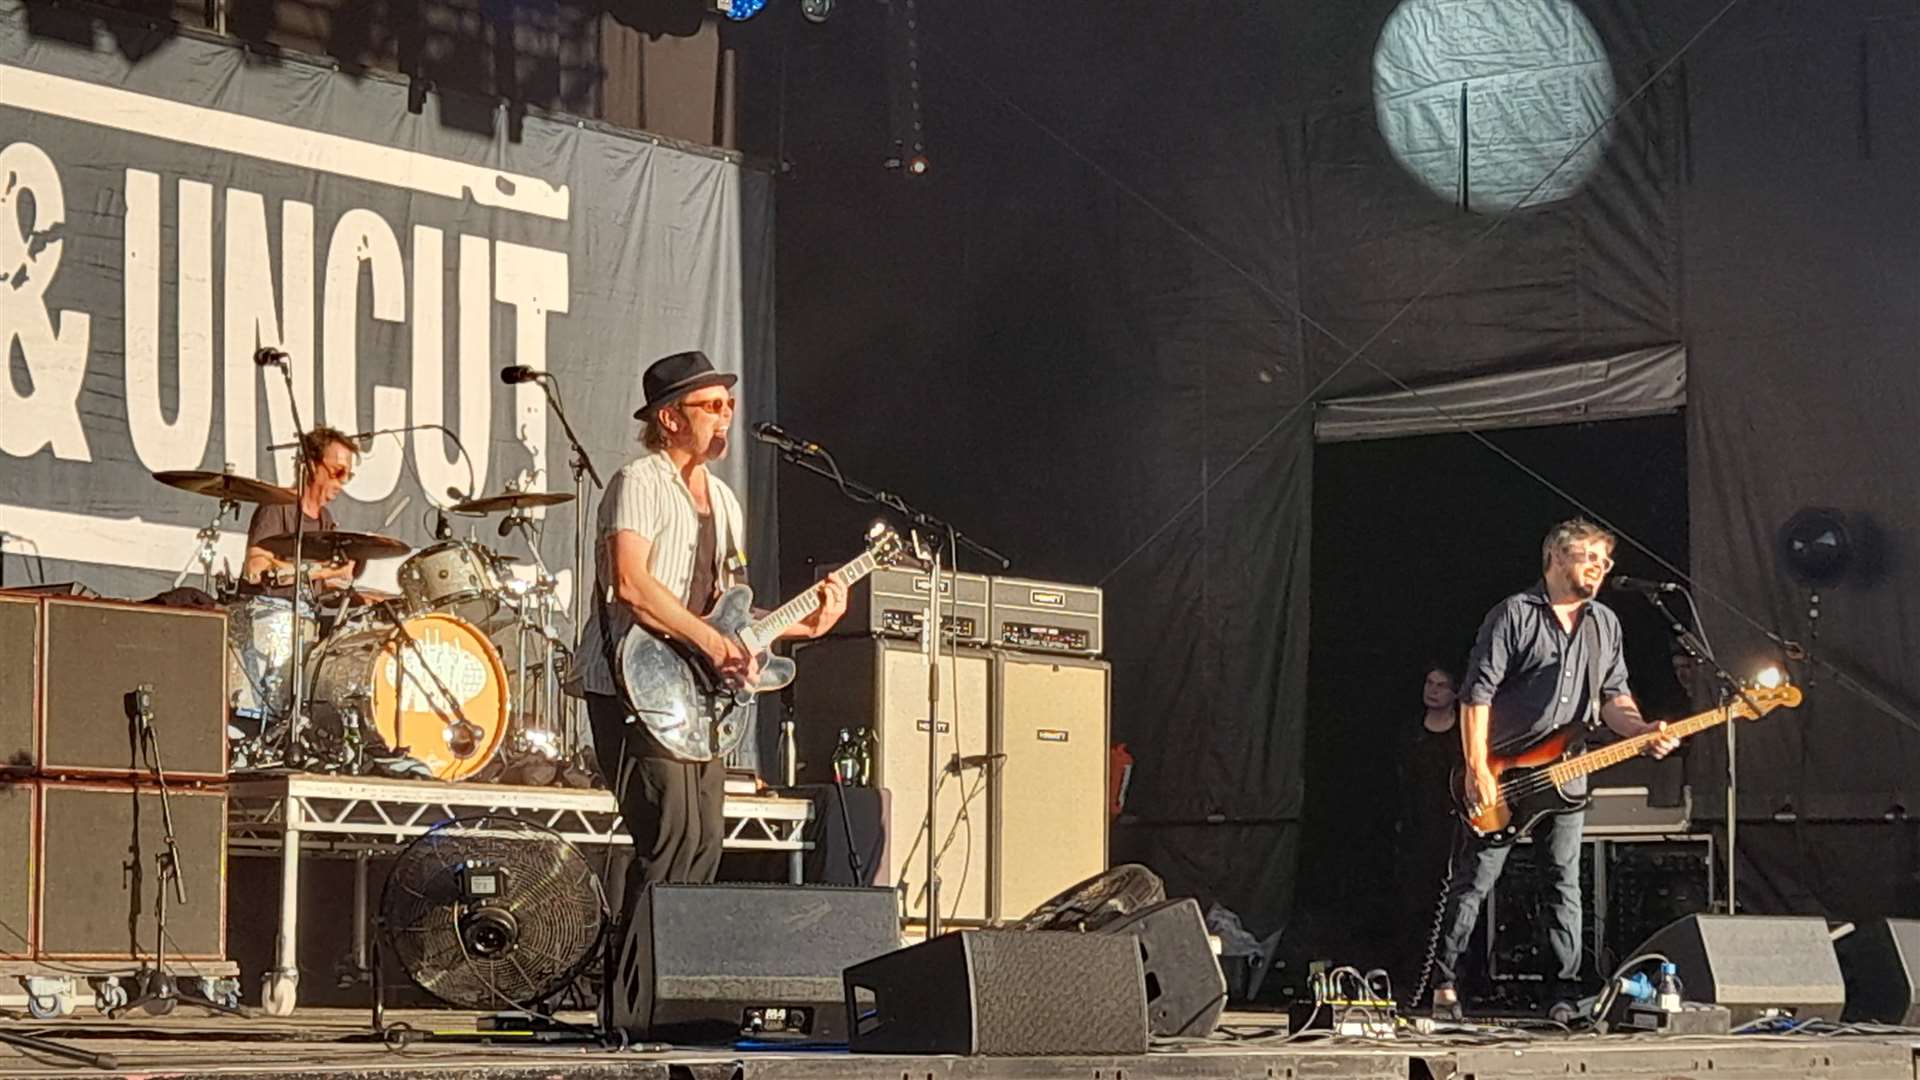 Gaz Coombes and co headlined the festival